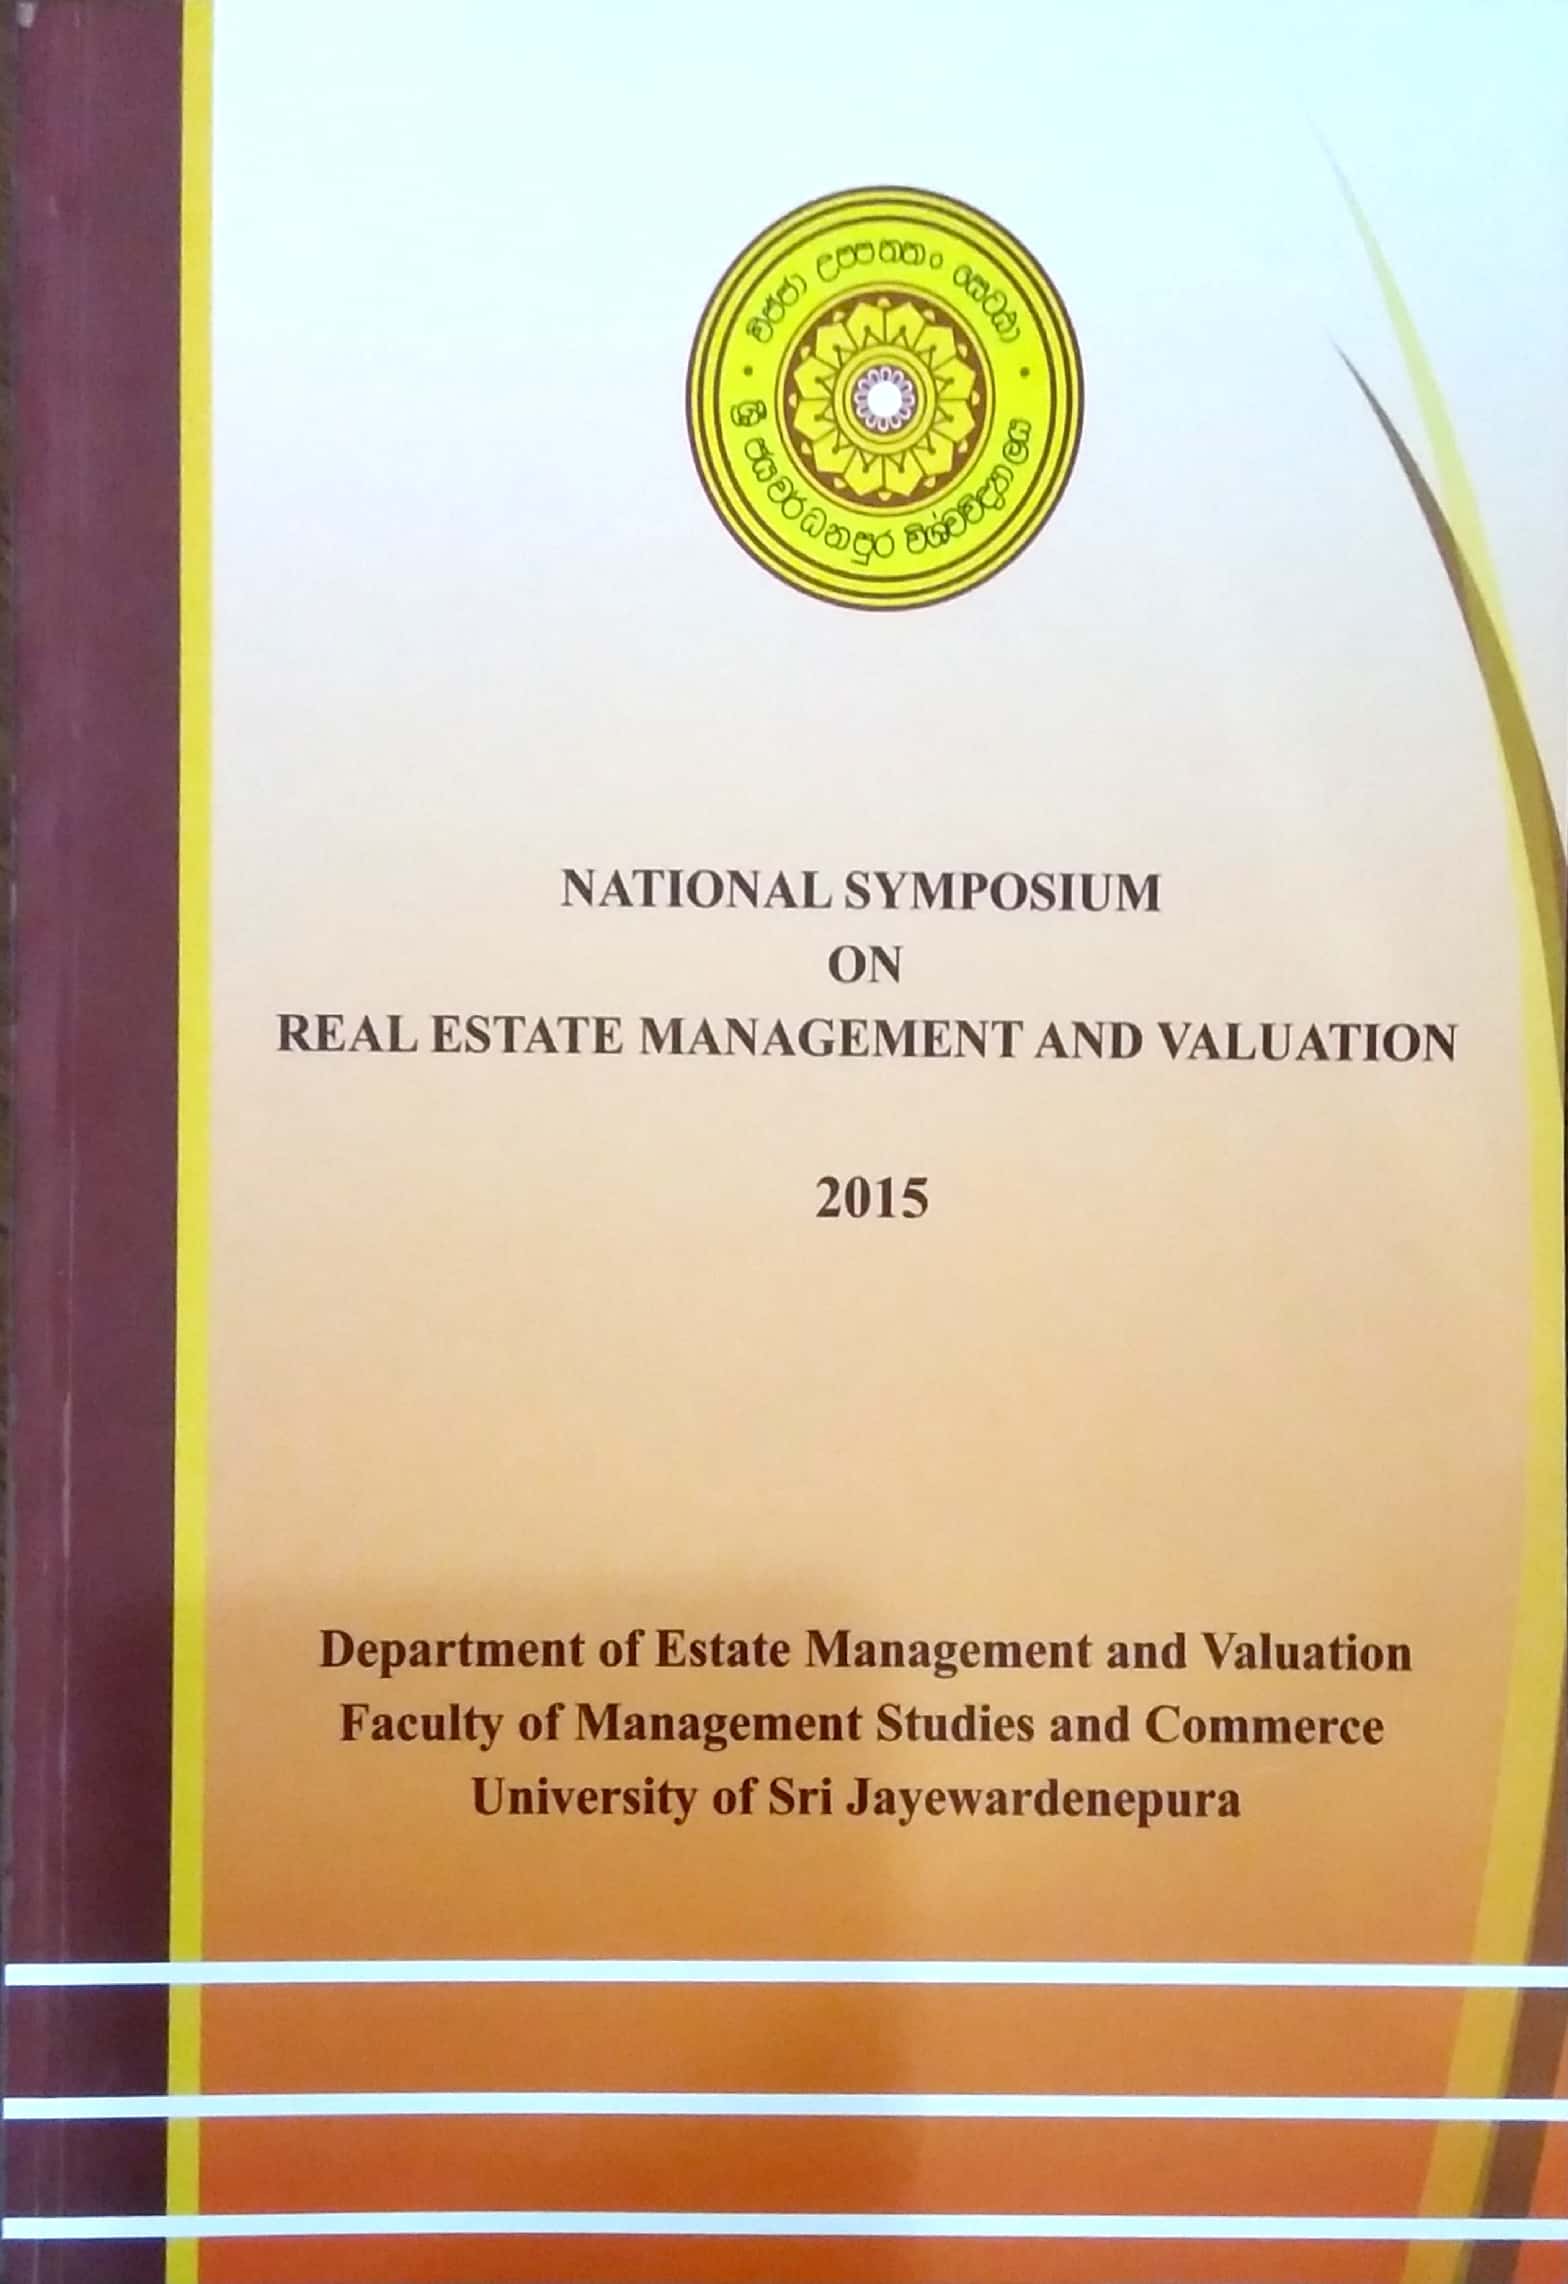 The 1st National Symposium on Real Estate Management and Valuation.